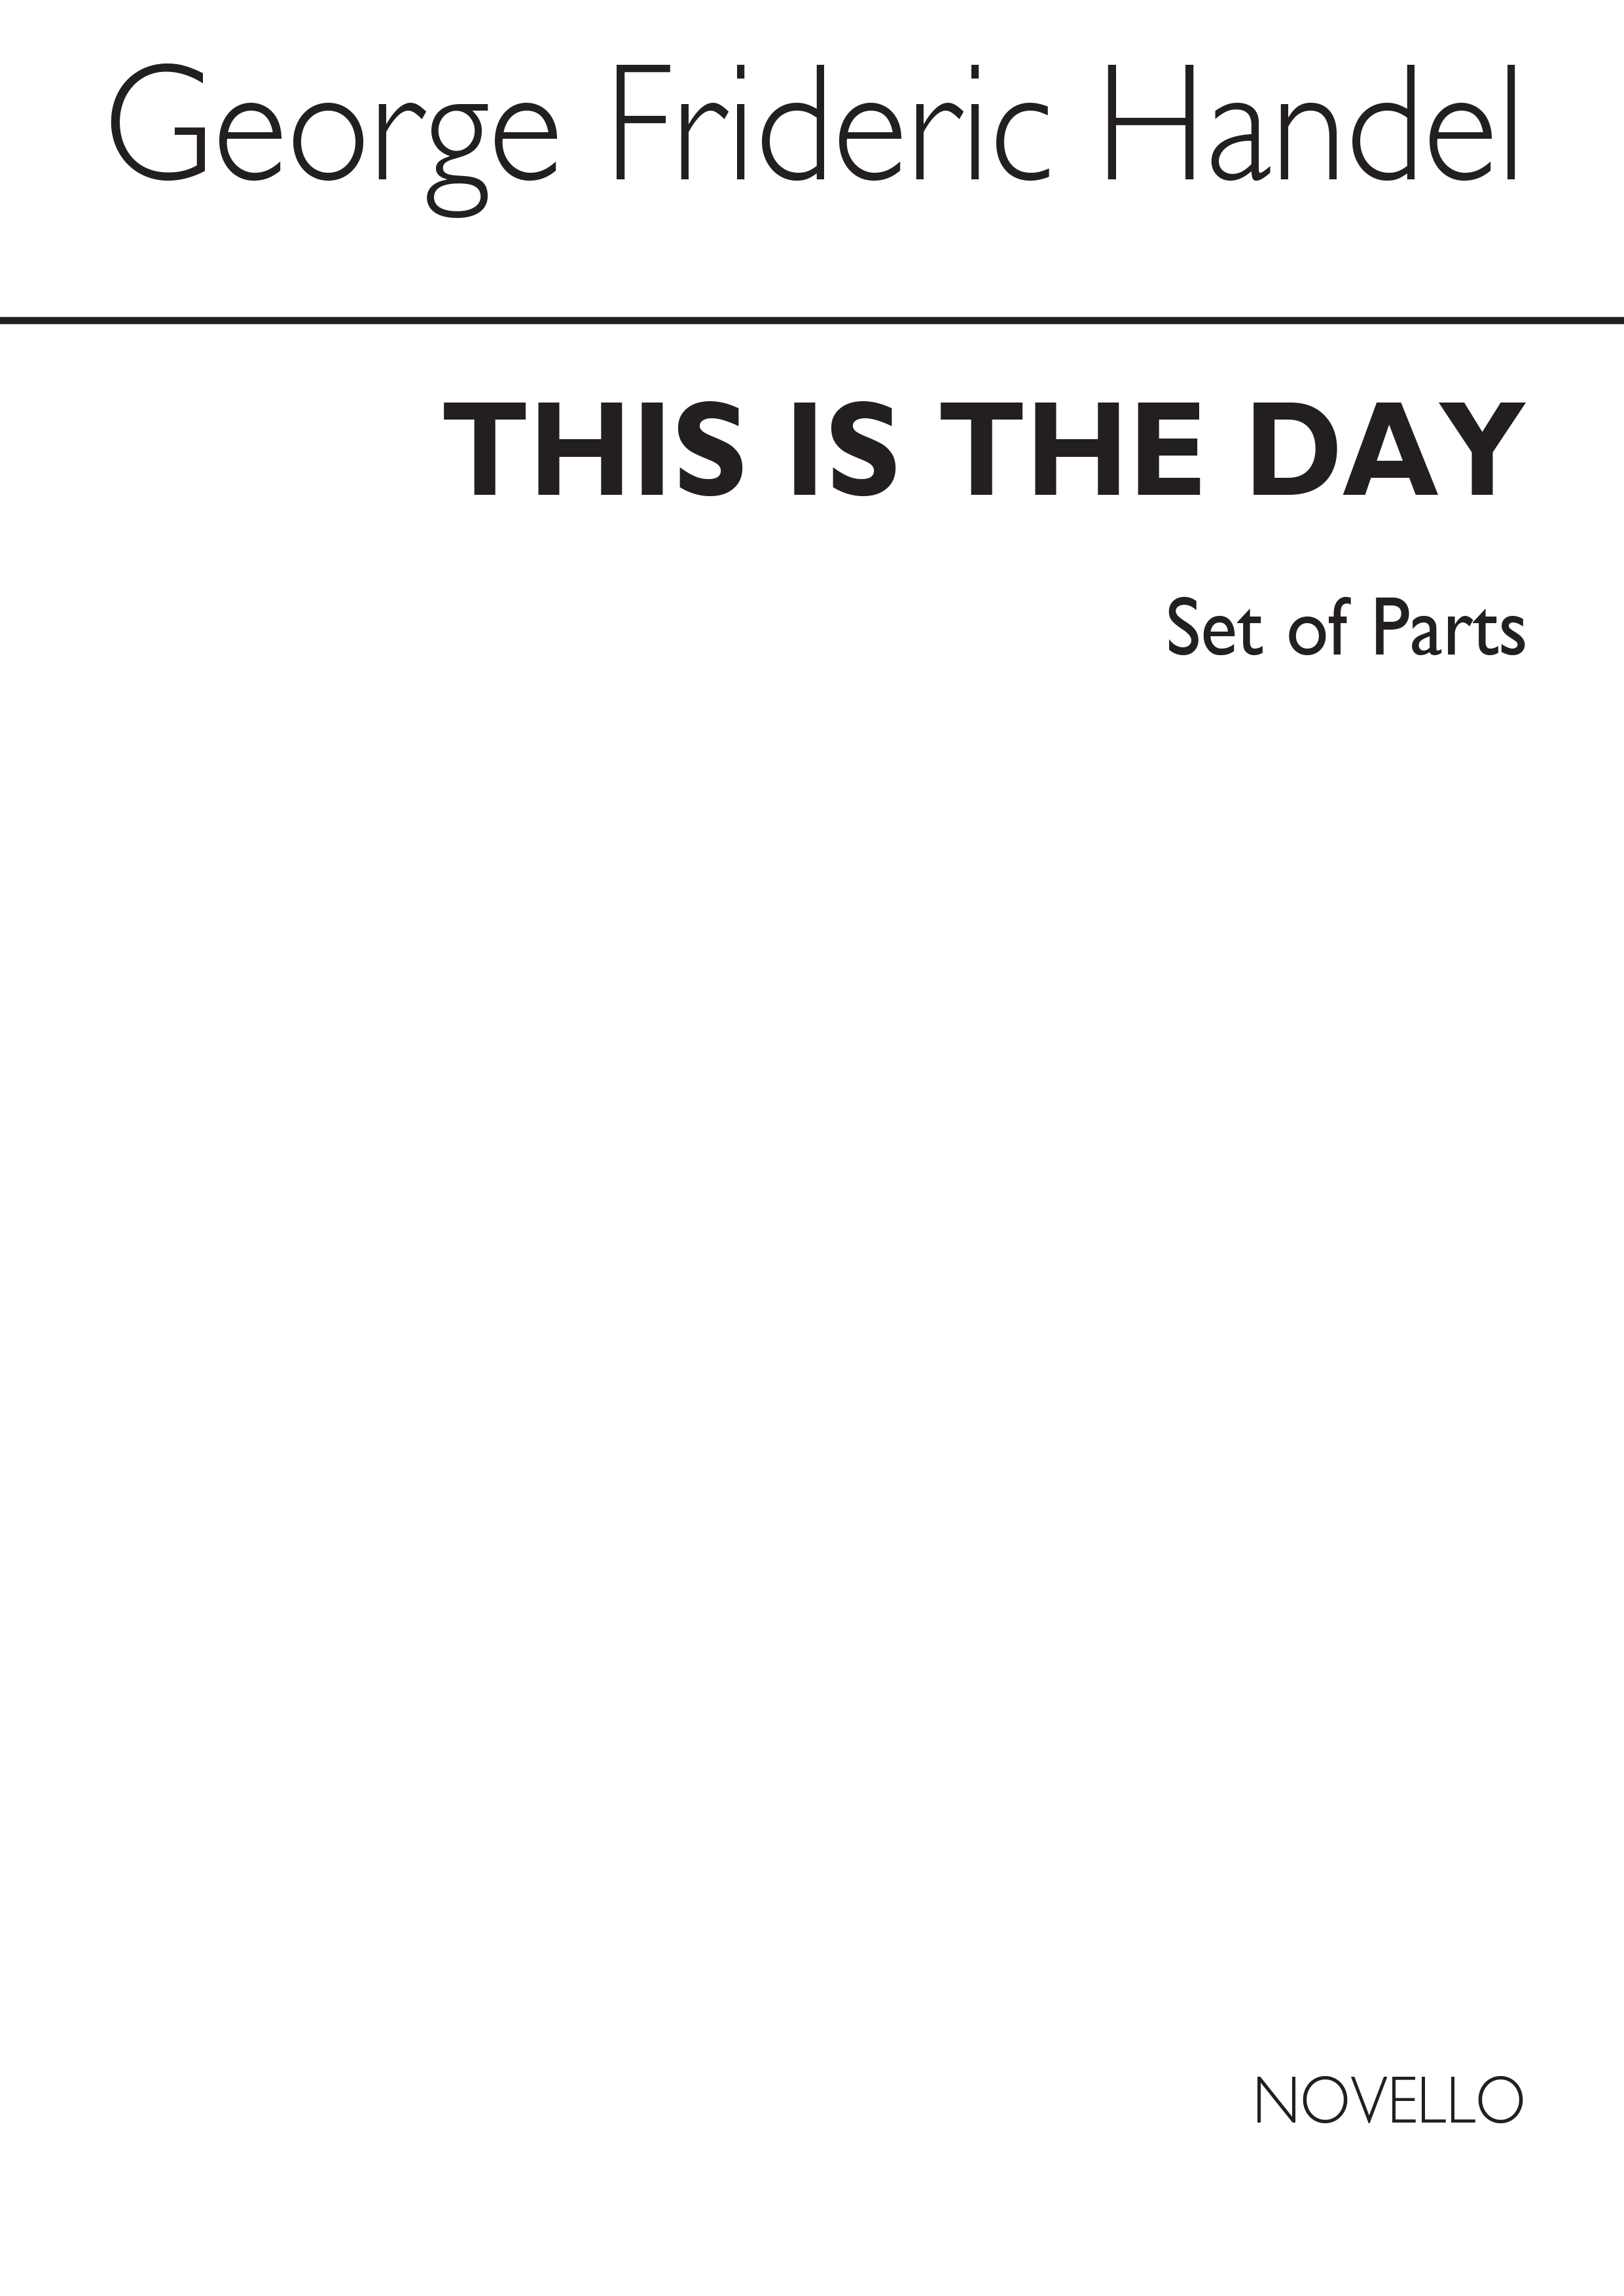 G.F. Handel: This Is The Day (Ed. Burrows) Extra Parts